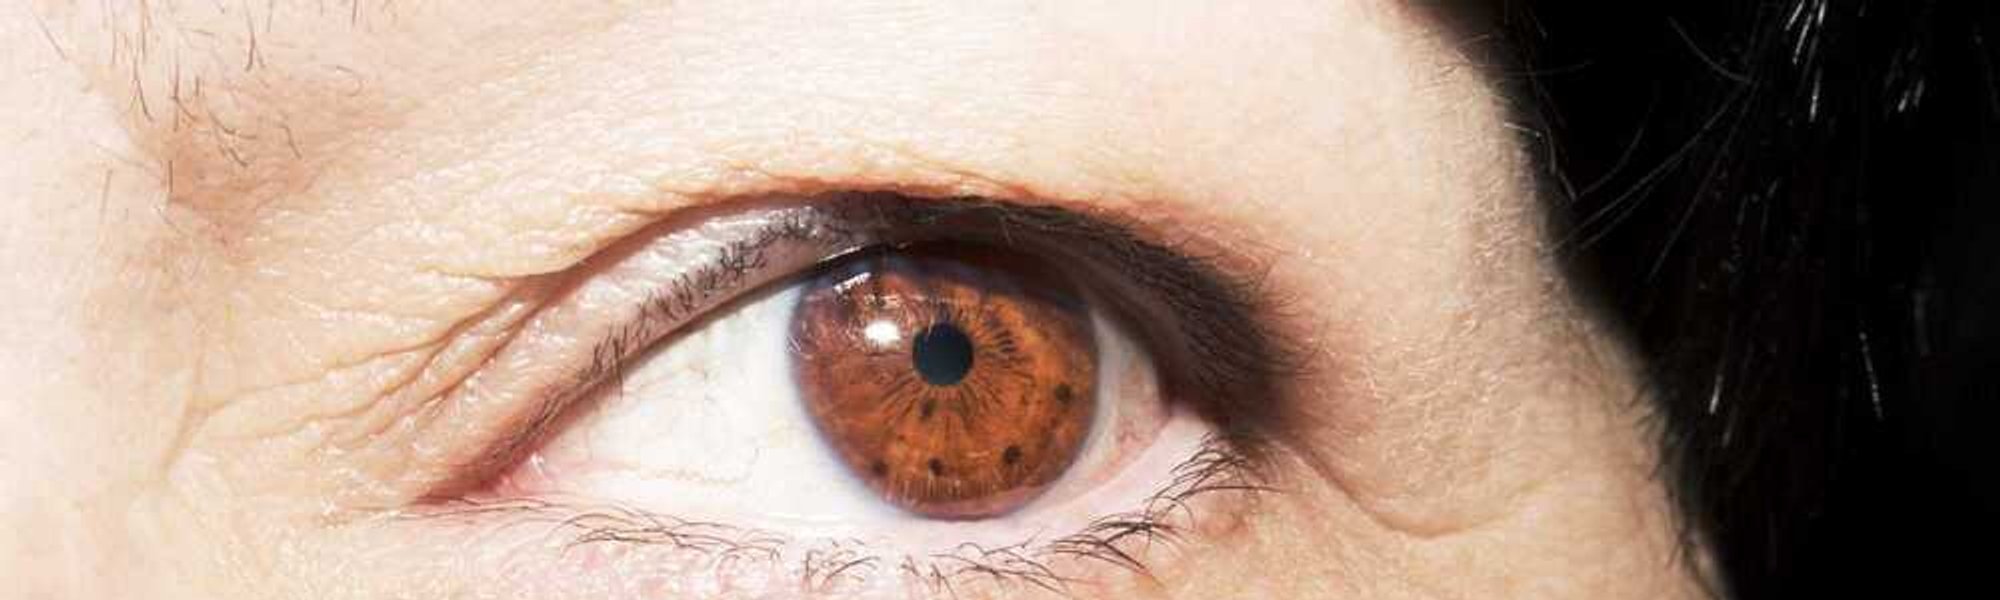 Eye Contour Acupressure The Solution For Younger Looking Eyes